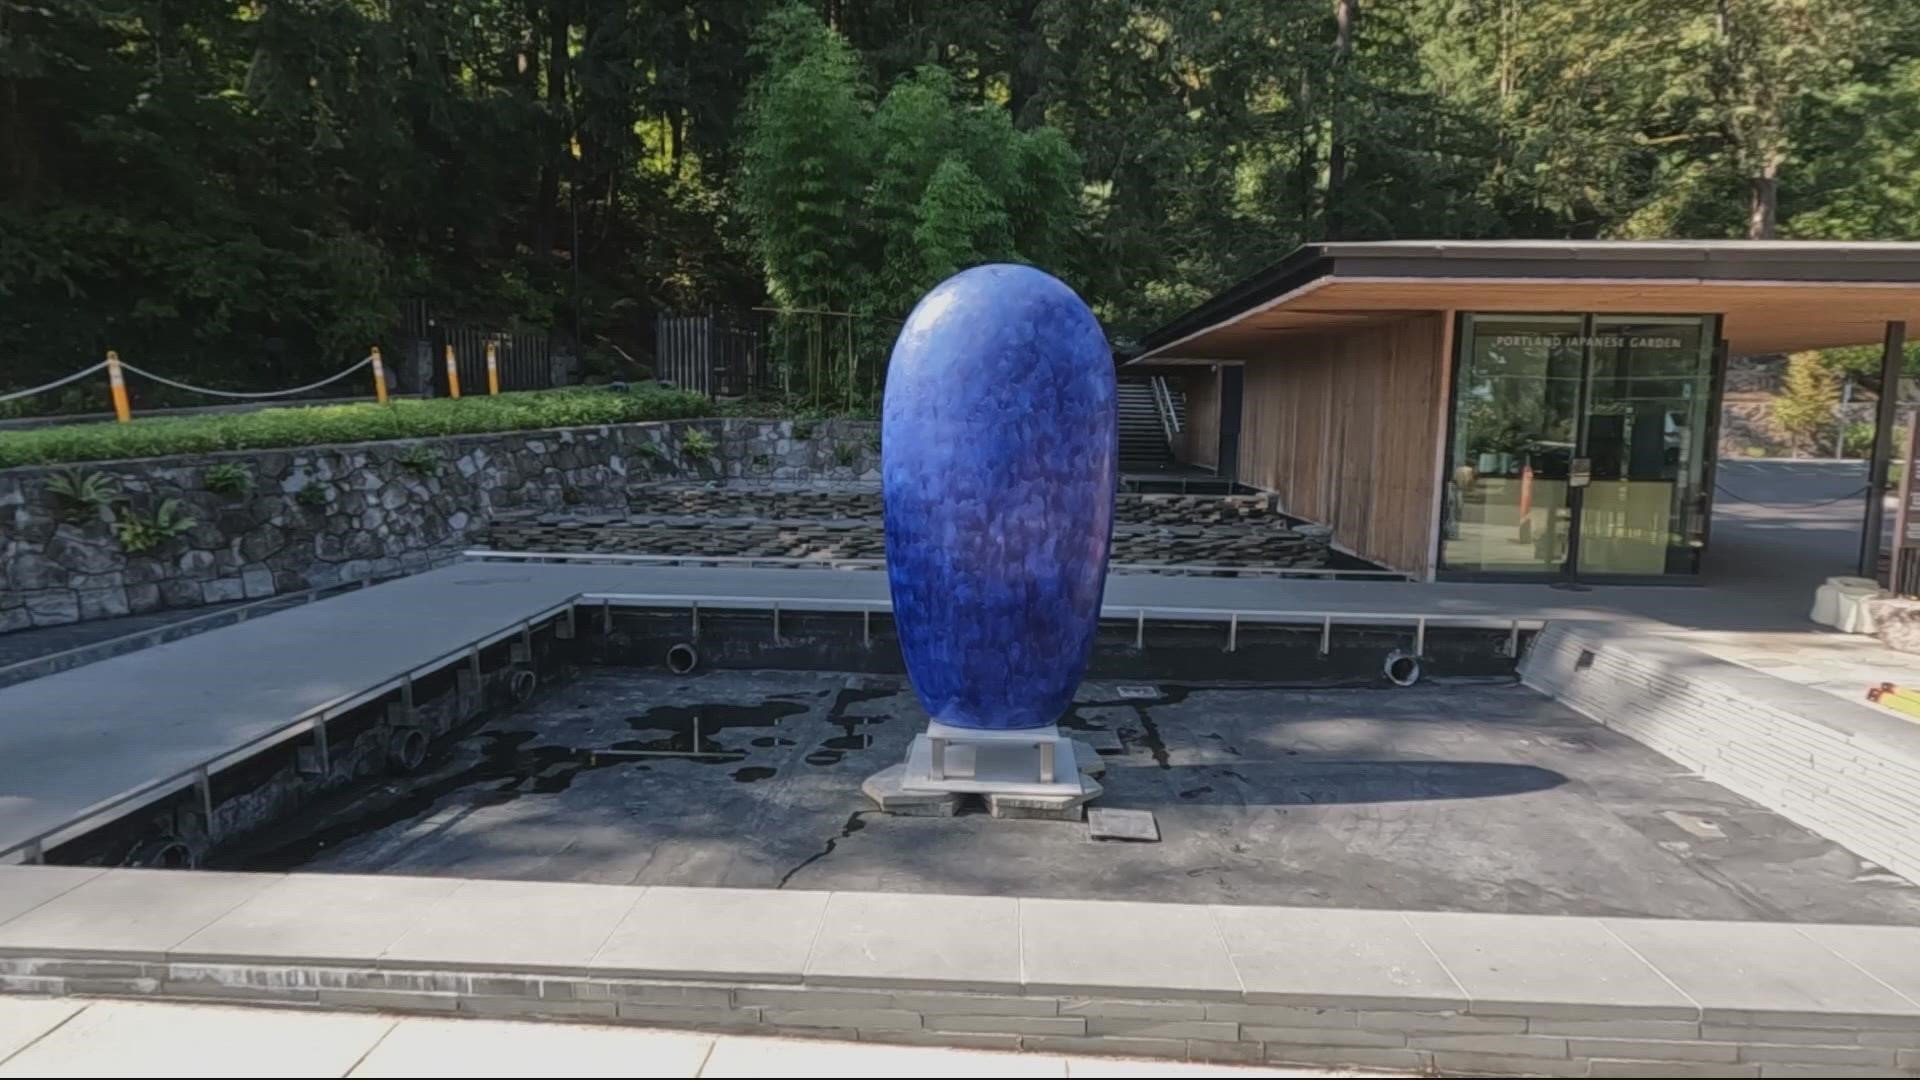 The Japanese Garden is preparing for its biggest art exhibition in nearly 60 years. Jon Goodwin got a firsthand look.